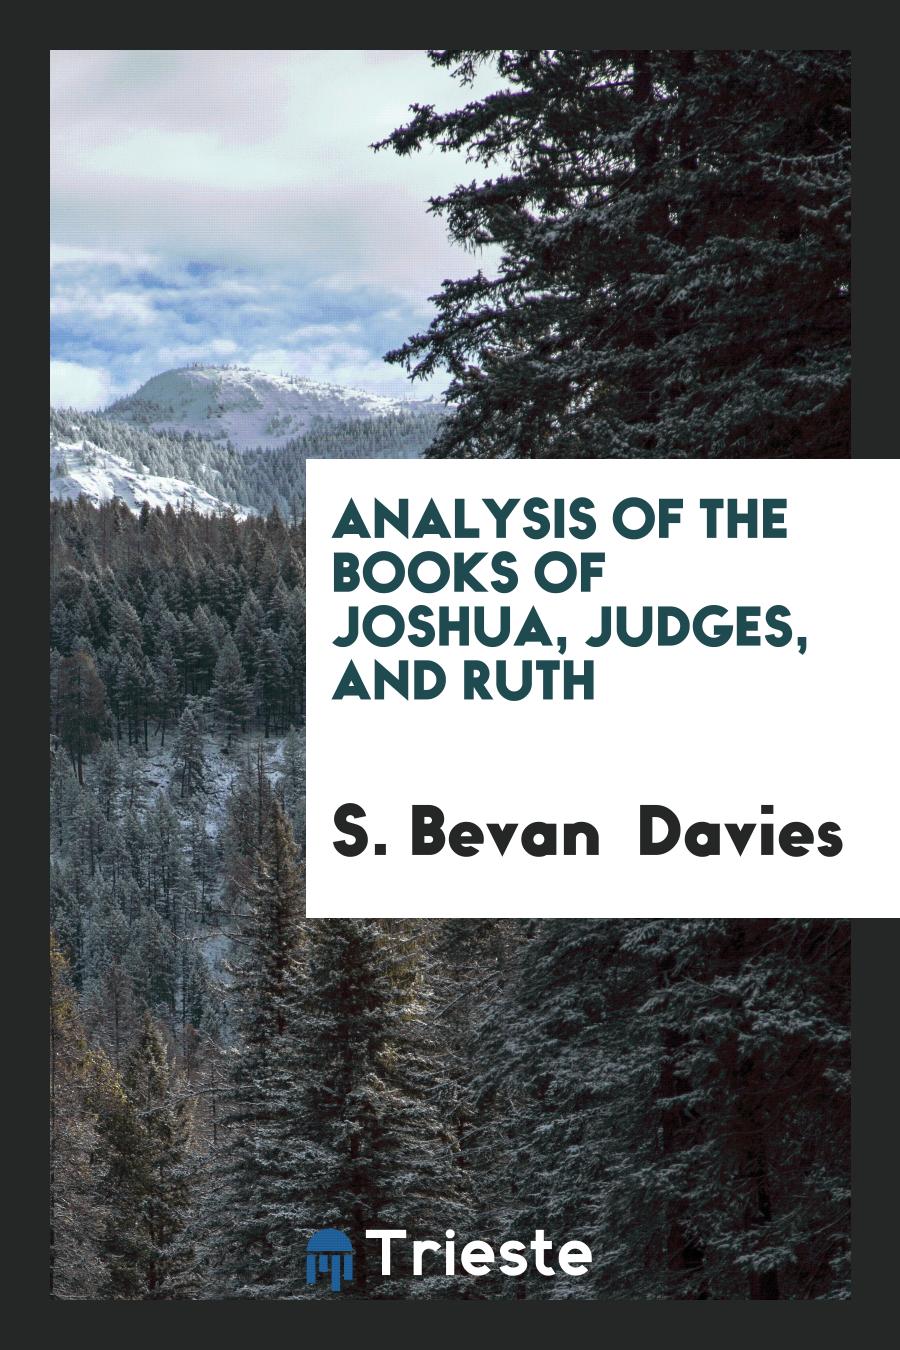 Analysis of the books of Joshua, Judges, and Ruth